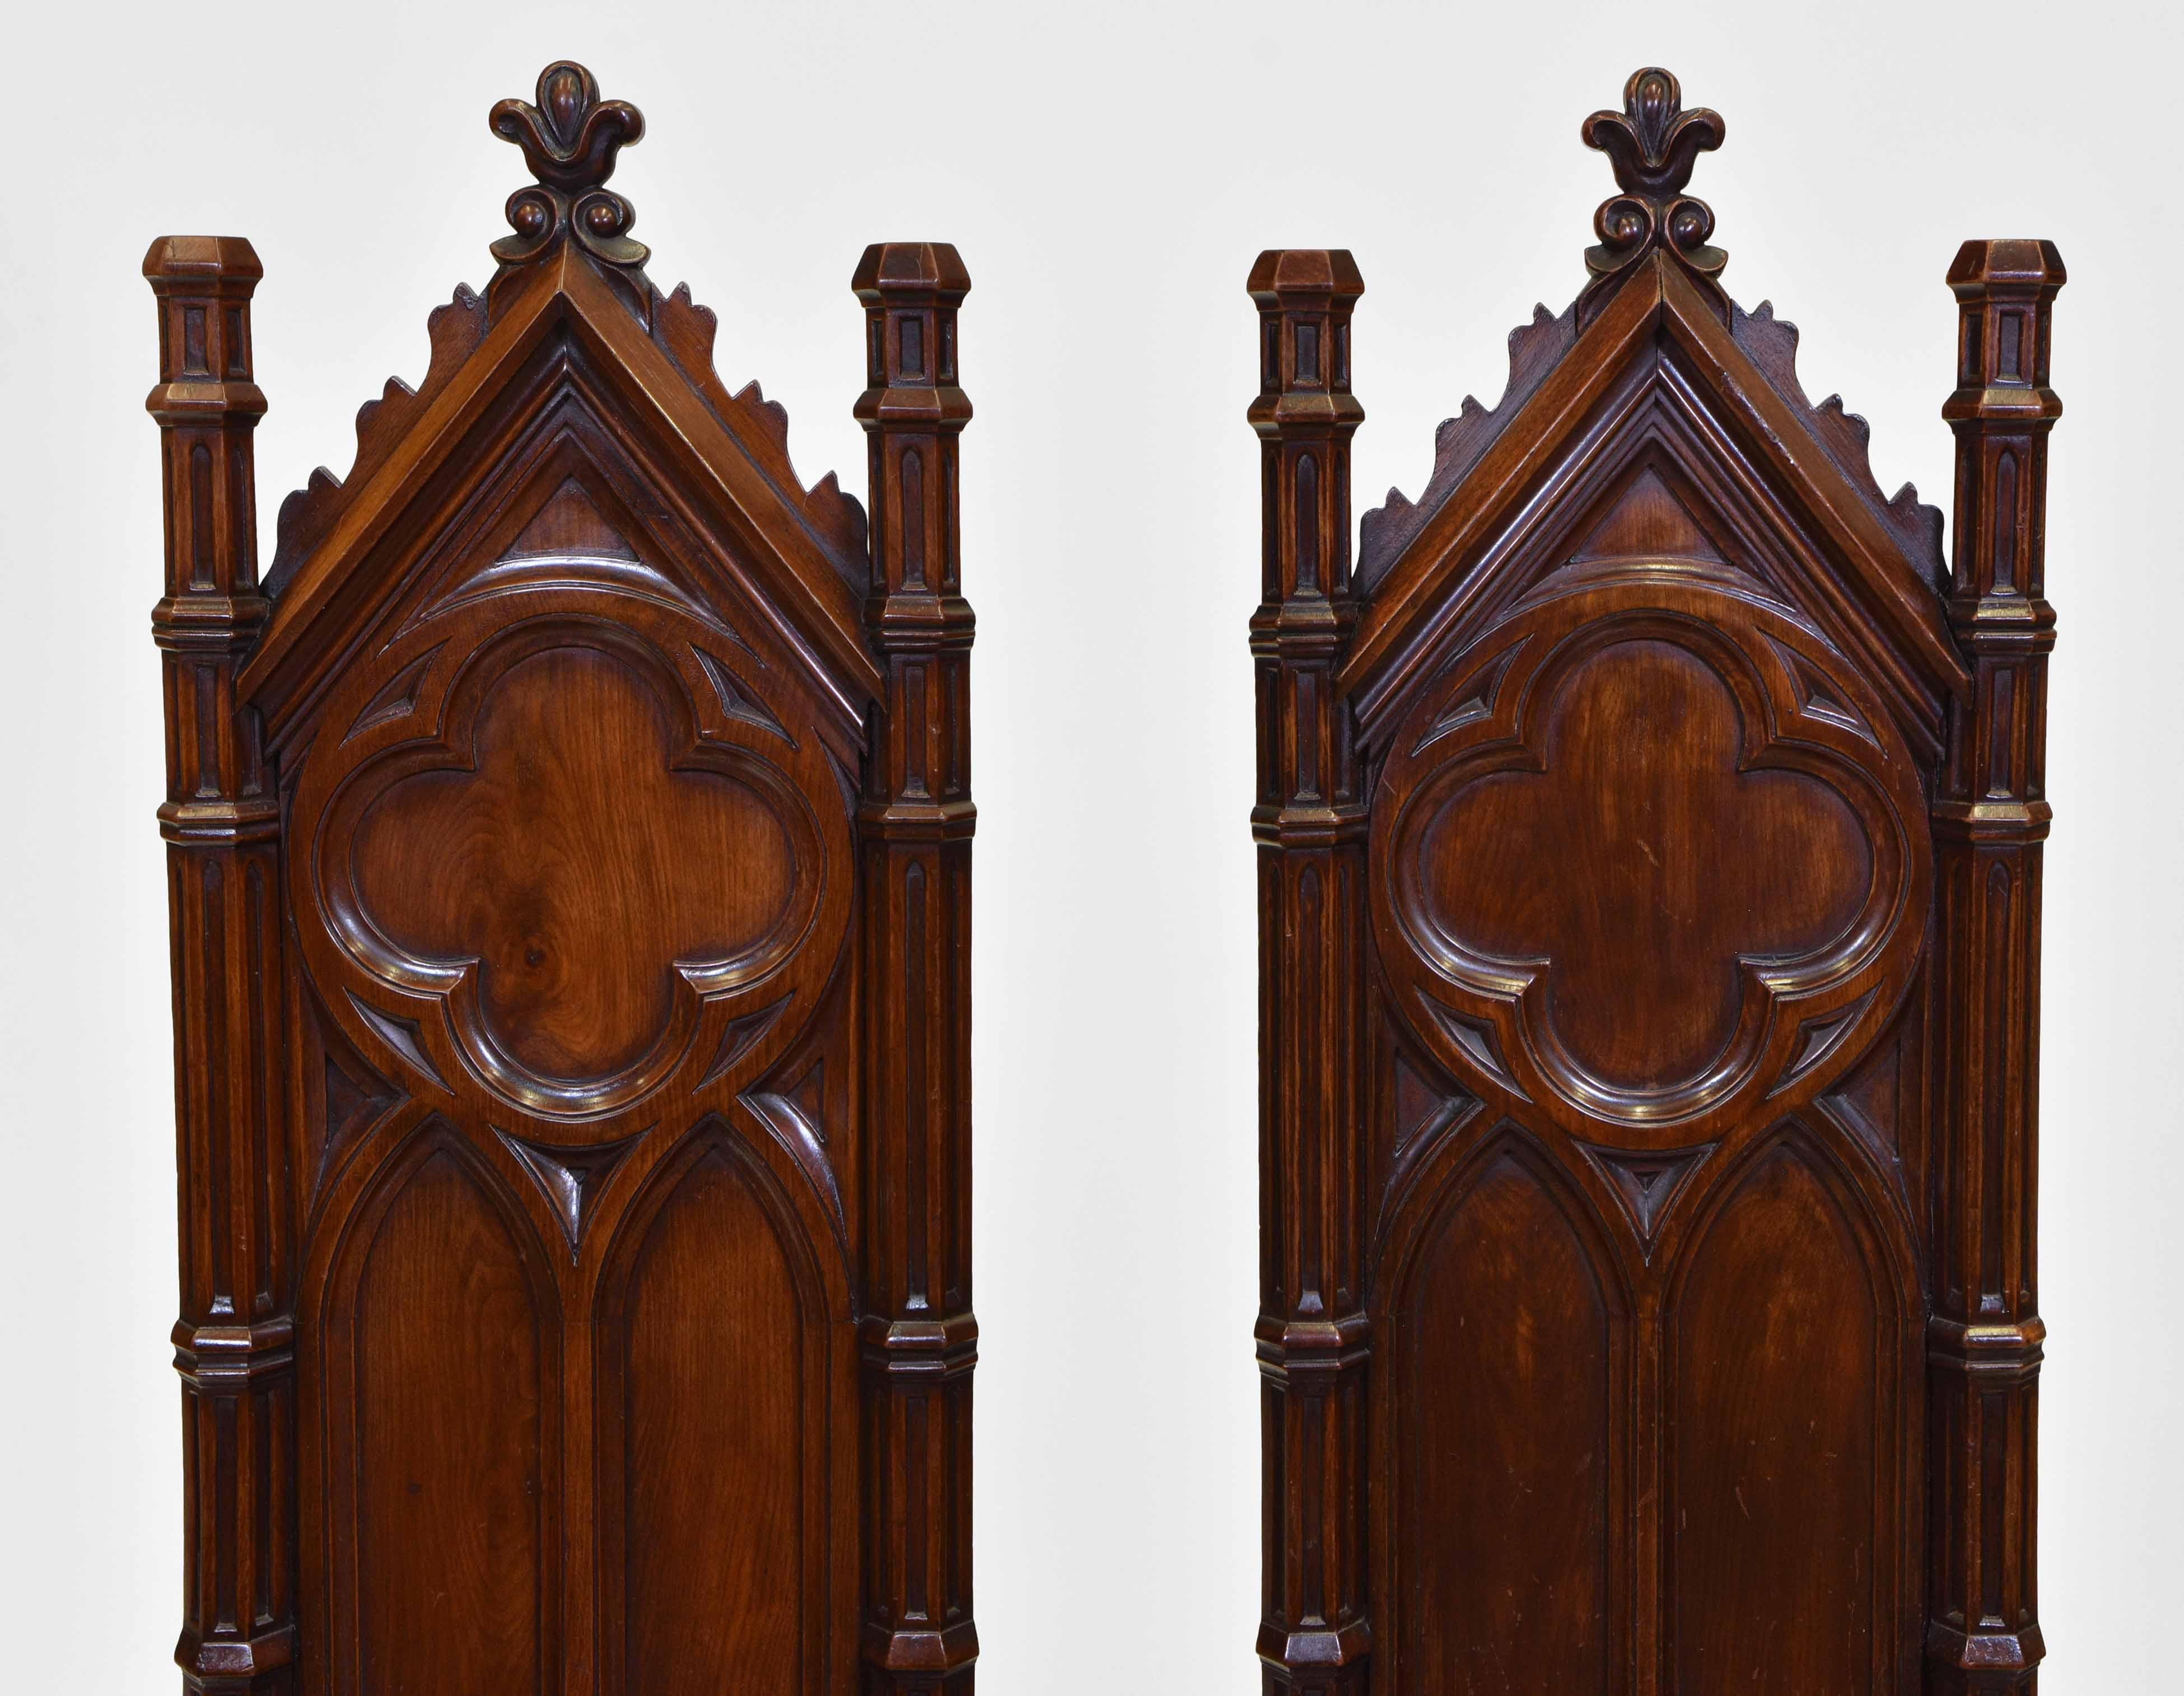 A fine pair of walnut gothic hall chairs. Circa 1850. 

*Free delivery for all areas in mainland England & Wales only. Delivery to room of choice by a two person team. Items are left packed. Please contact me if you require more delivery